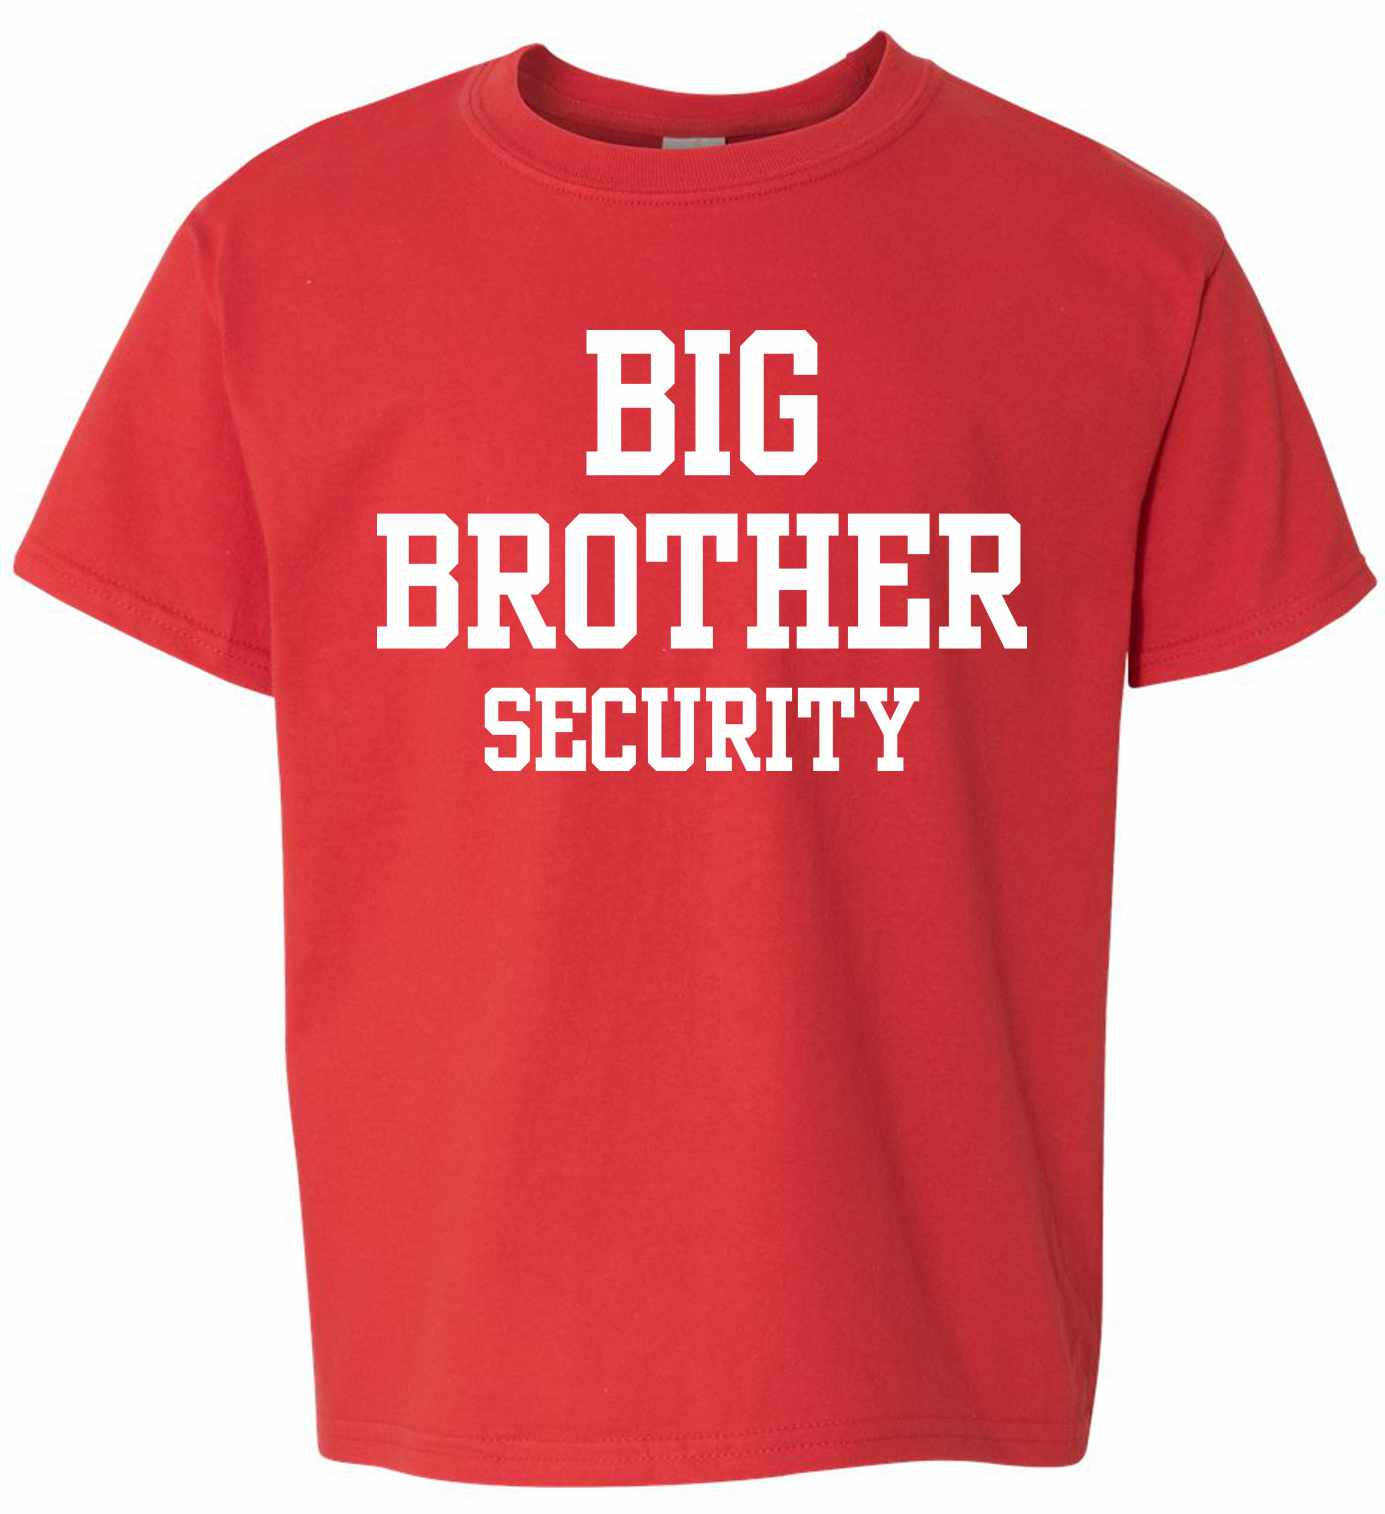 Big Brother Security on Youth T-Shirt (#1136-201)